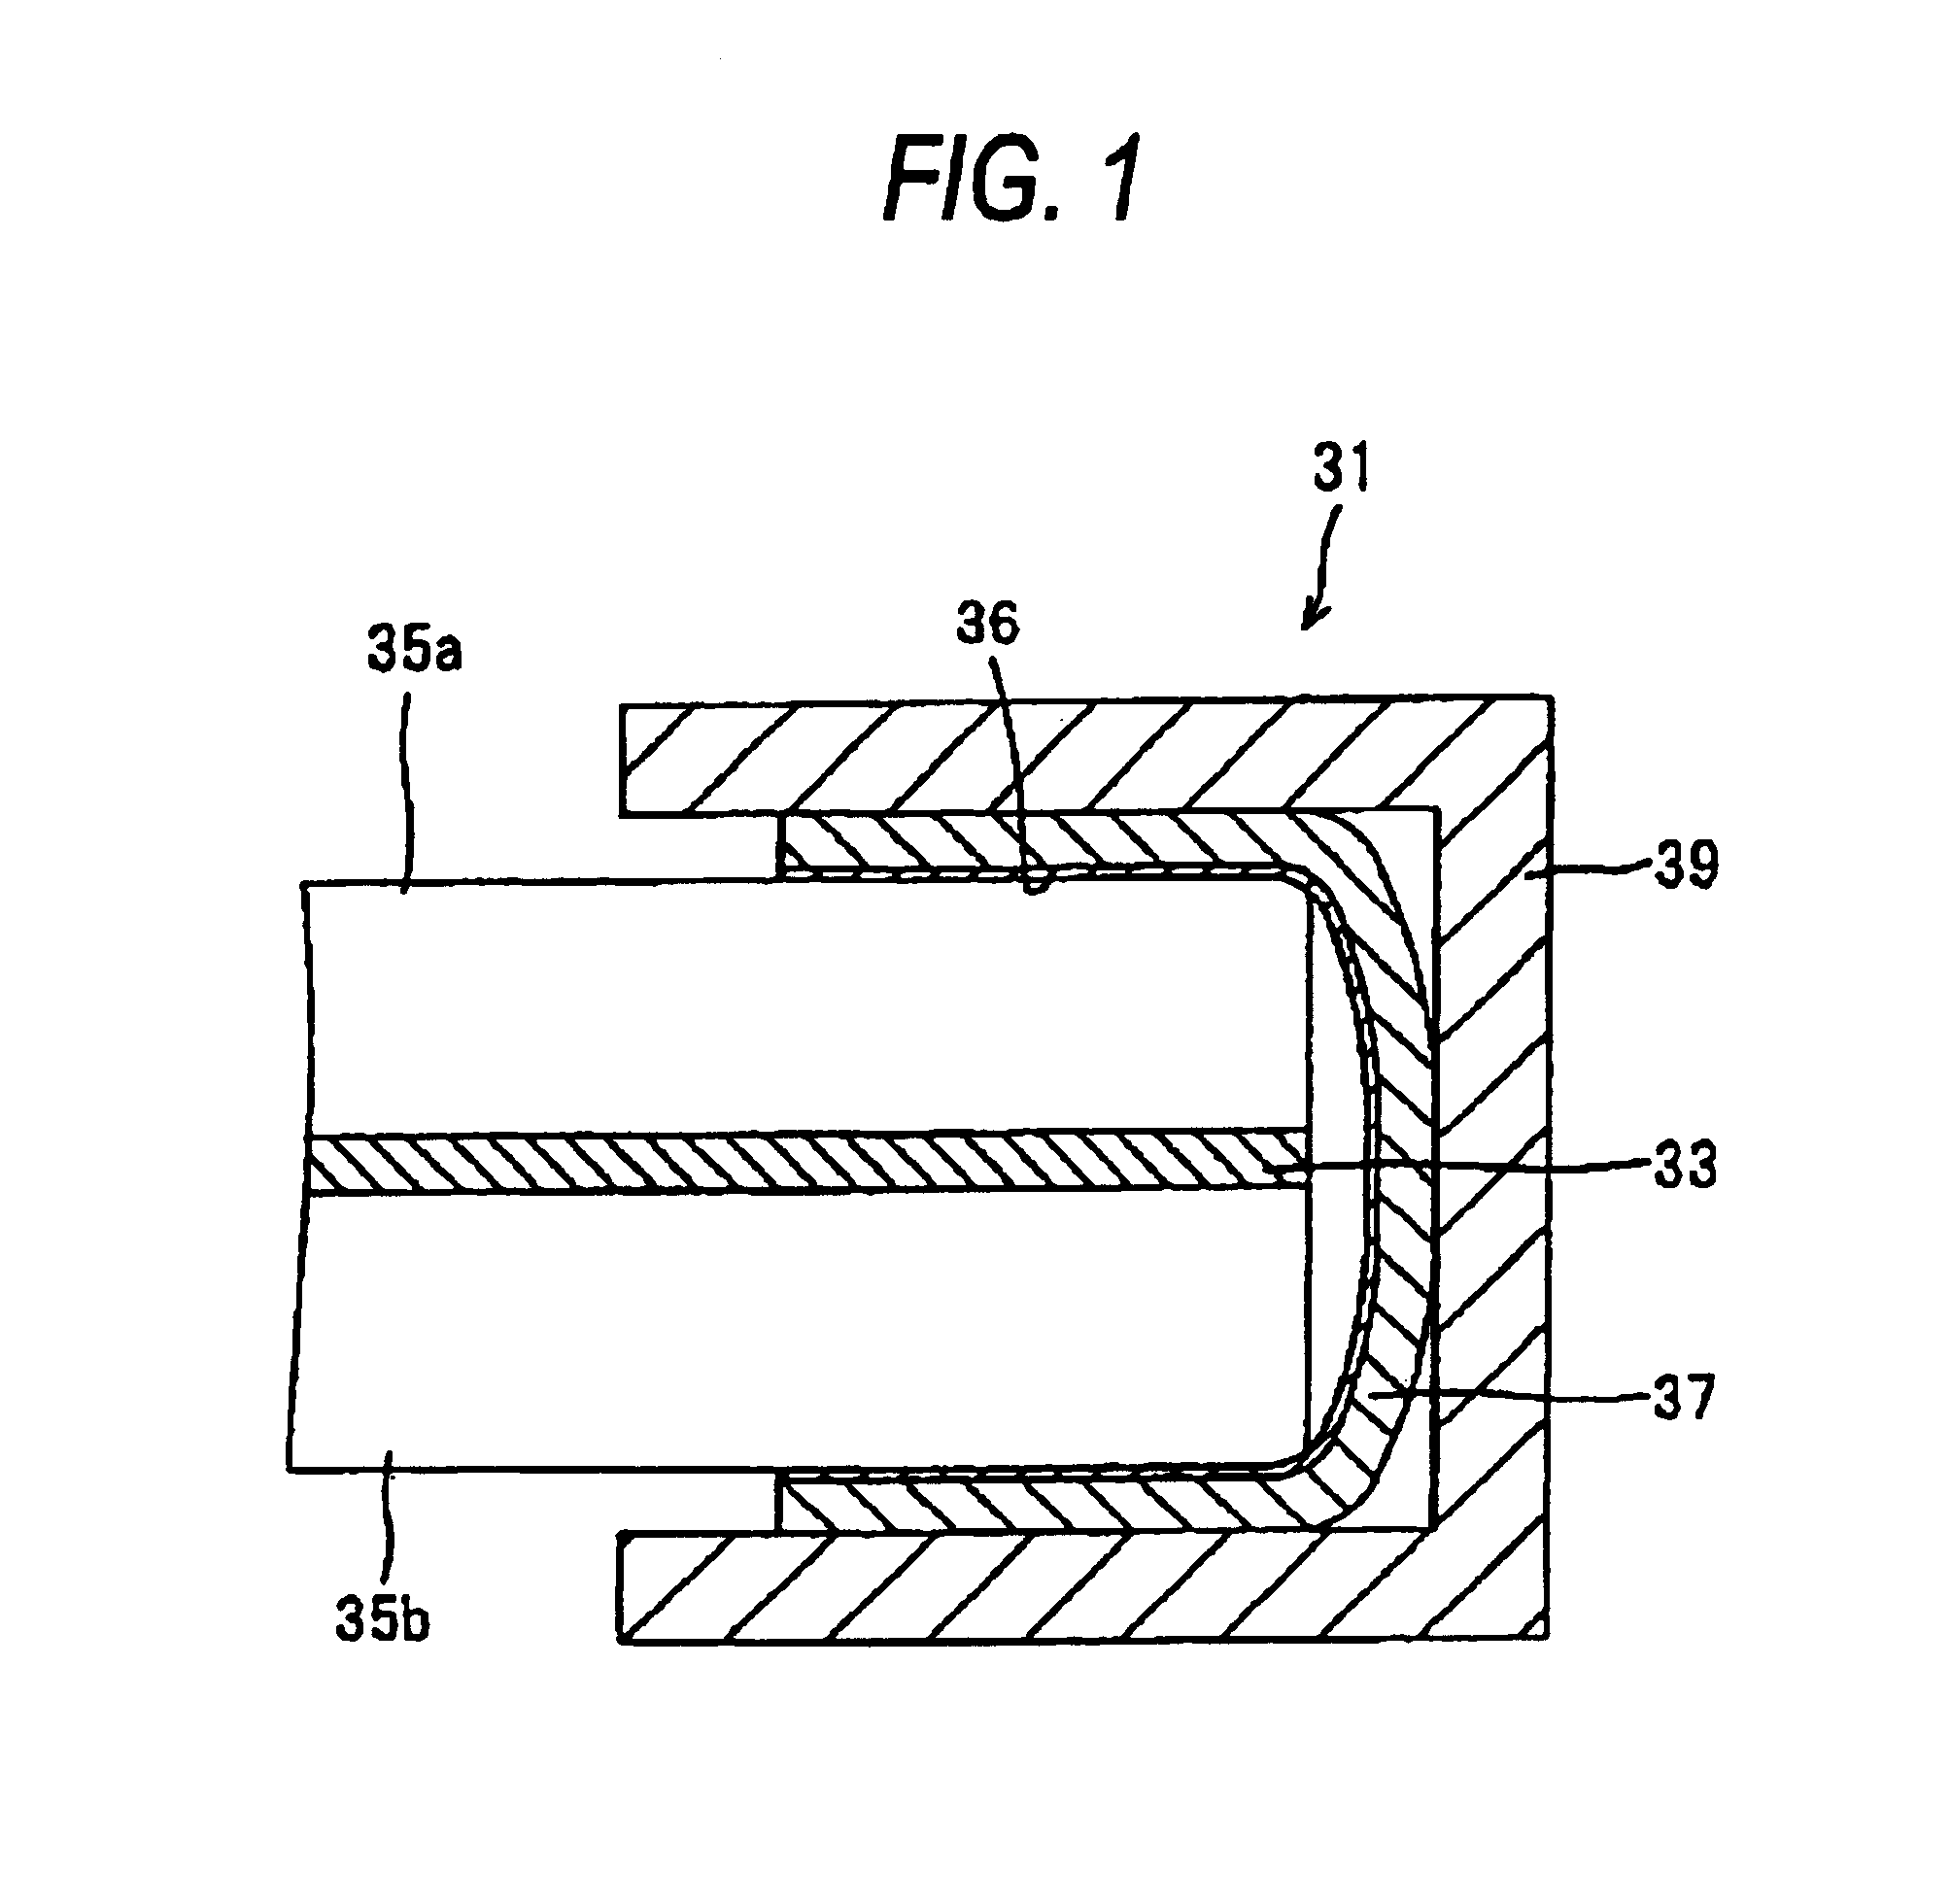 Electromagnetic wave shielding window, manufacturing apparatus having the same, transport system having the same, building construction having the same, and electromagnetic wave shielding method